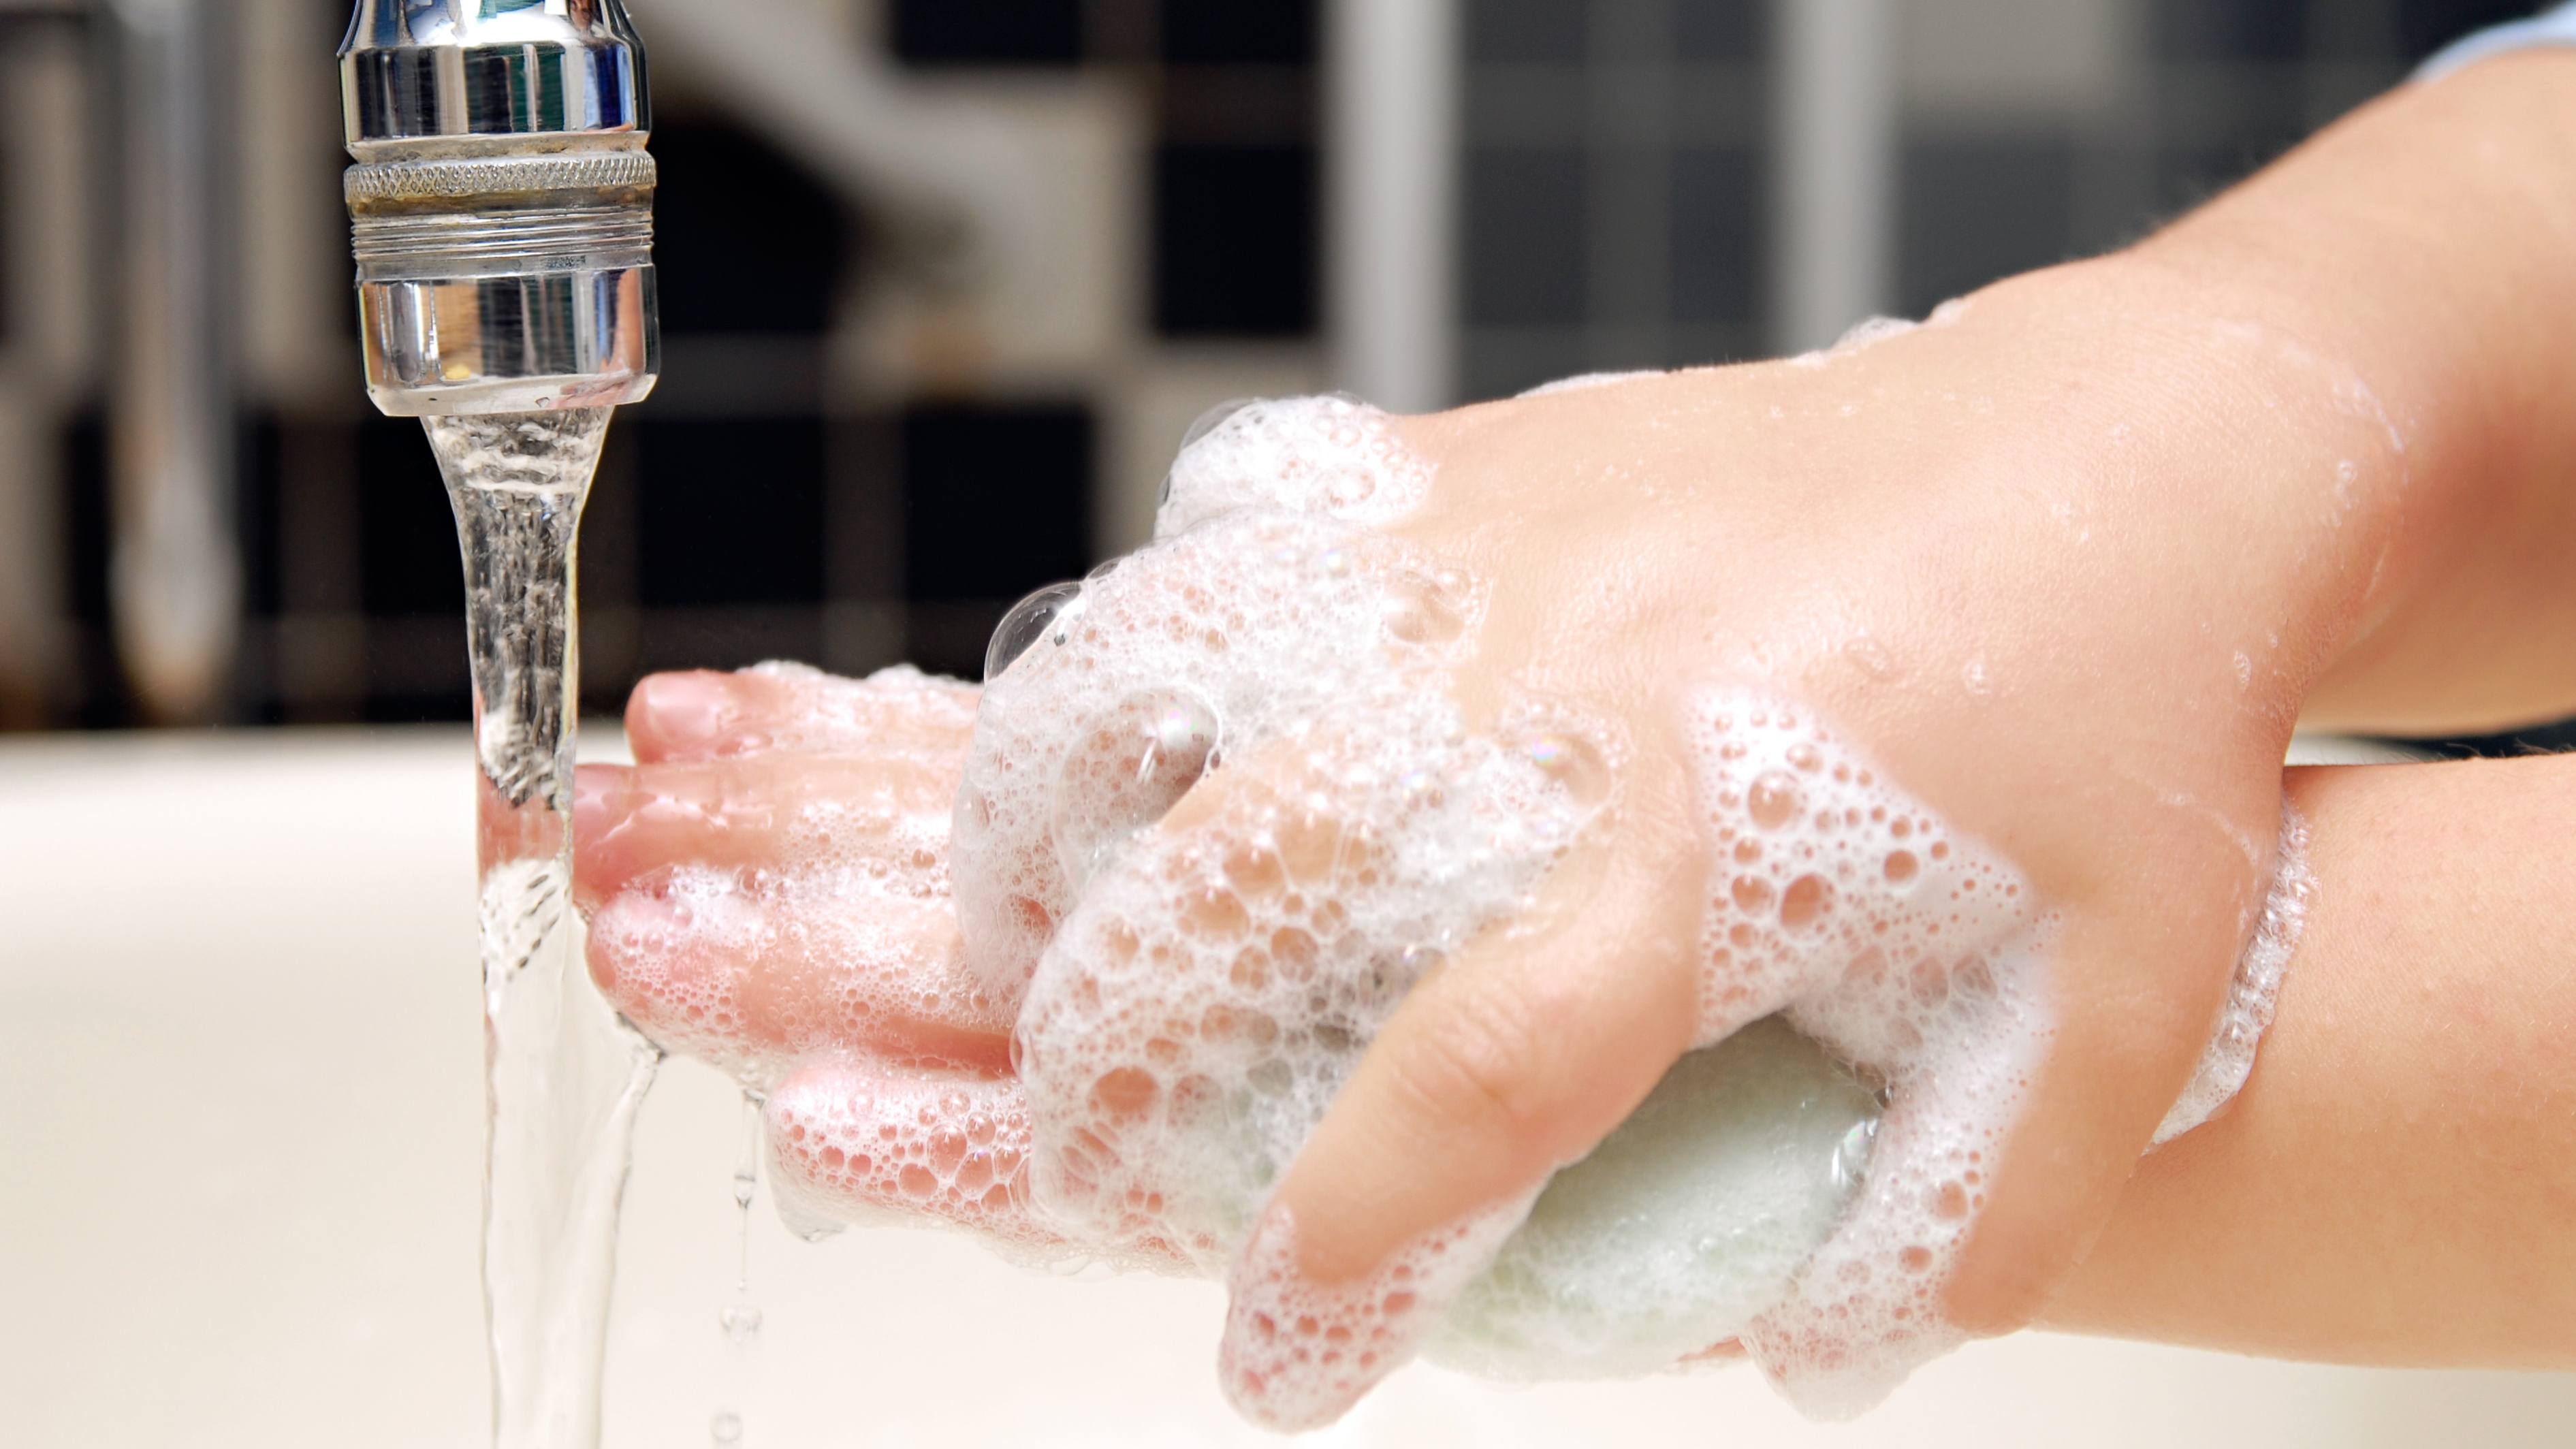 https://newsnetwork.mayoclinic.org/n7-mcnn/7bcc9724adf7b803/uploads/2020/08/a-young-white-child-with-soapy-hands-washing-them-under-a-faucet-with-running-water-16x9-1.jpg